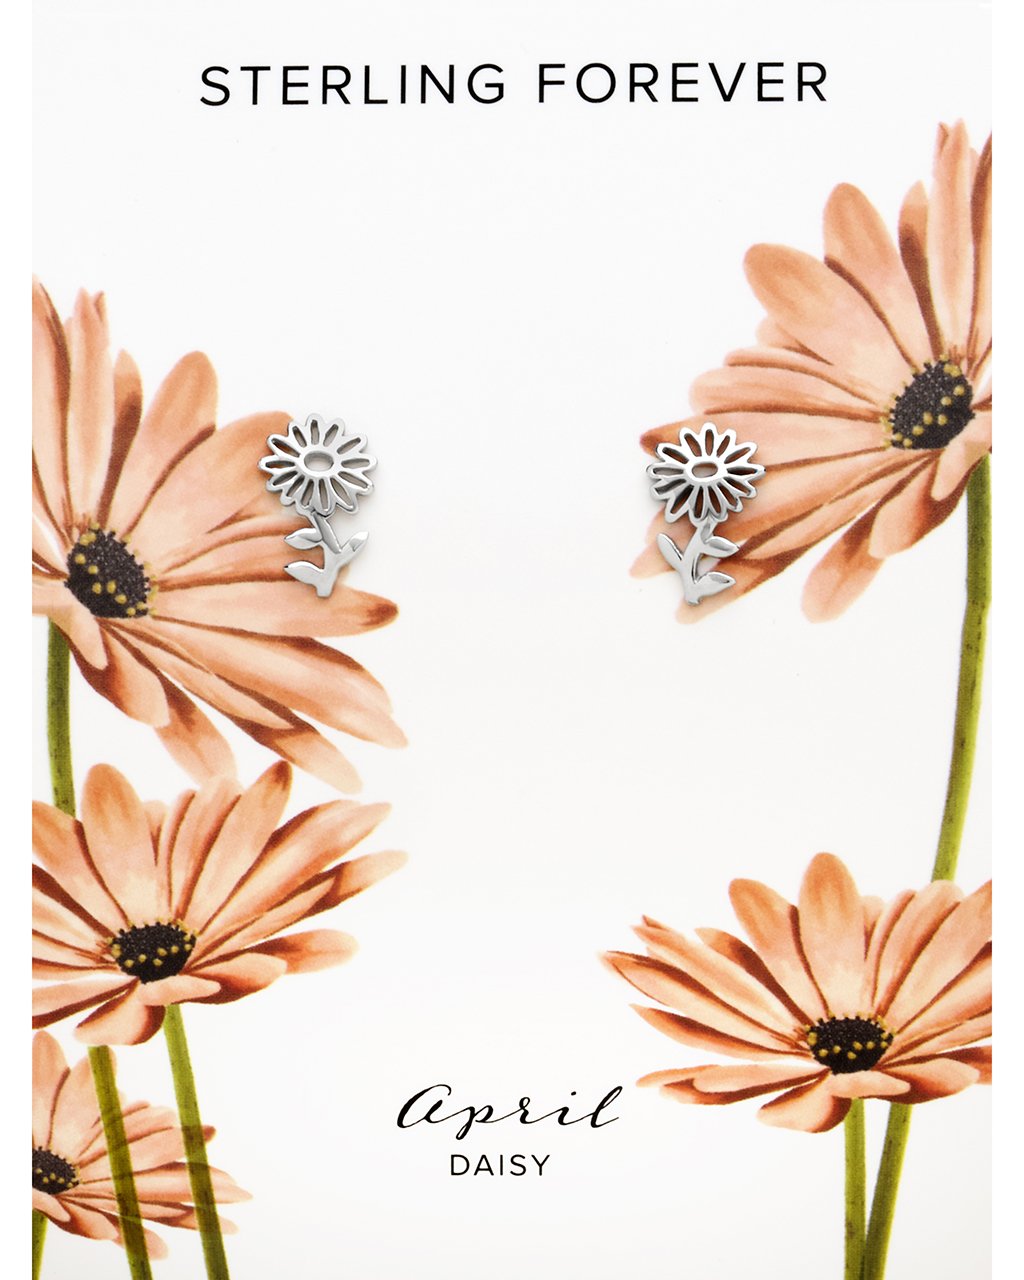 Sterling Silver Birth Flower Studs Earring Sterling Forever Silver April / Daisy 